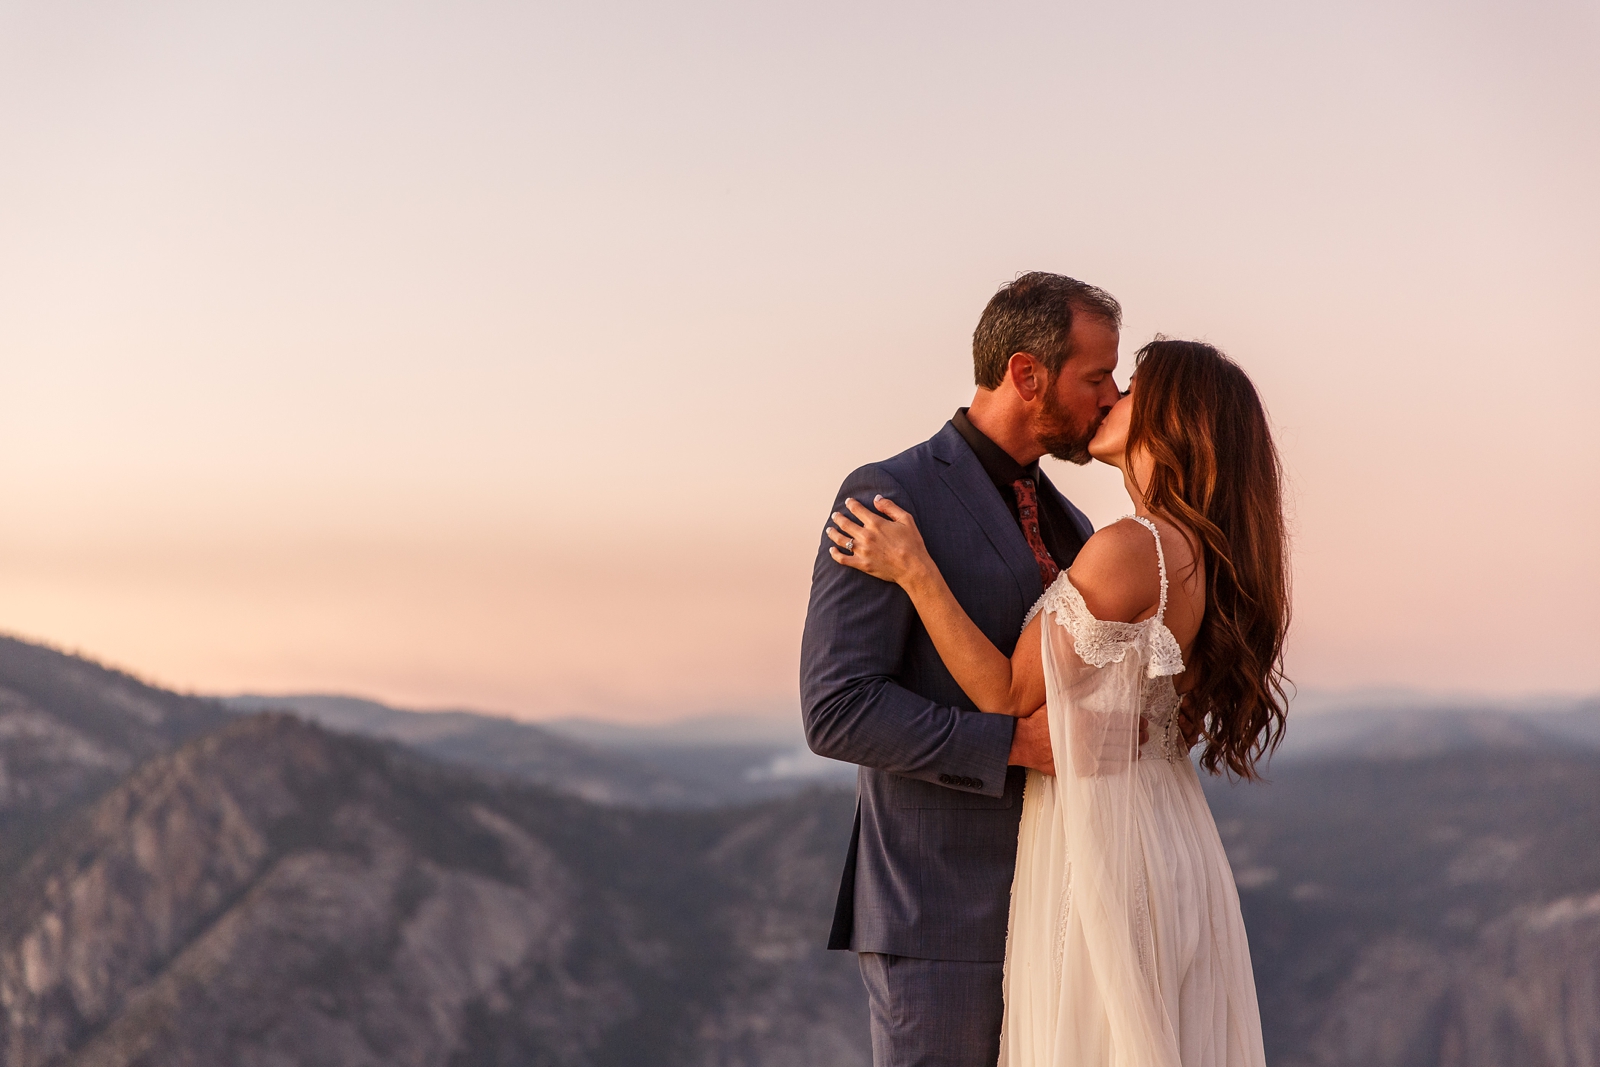 This couple just eloped at Taft Point in Yosemite NP.